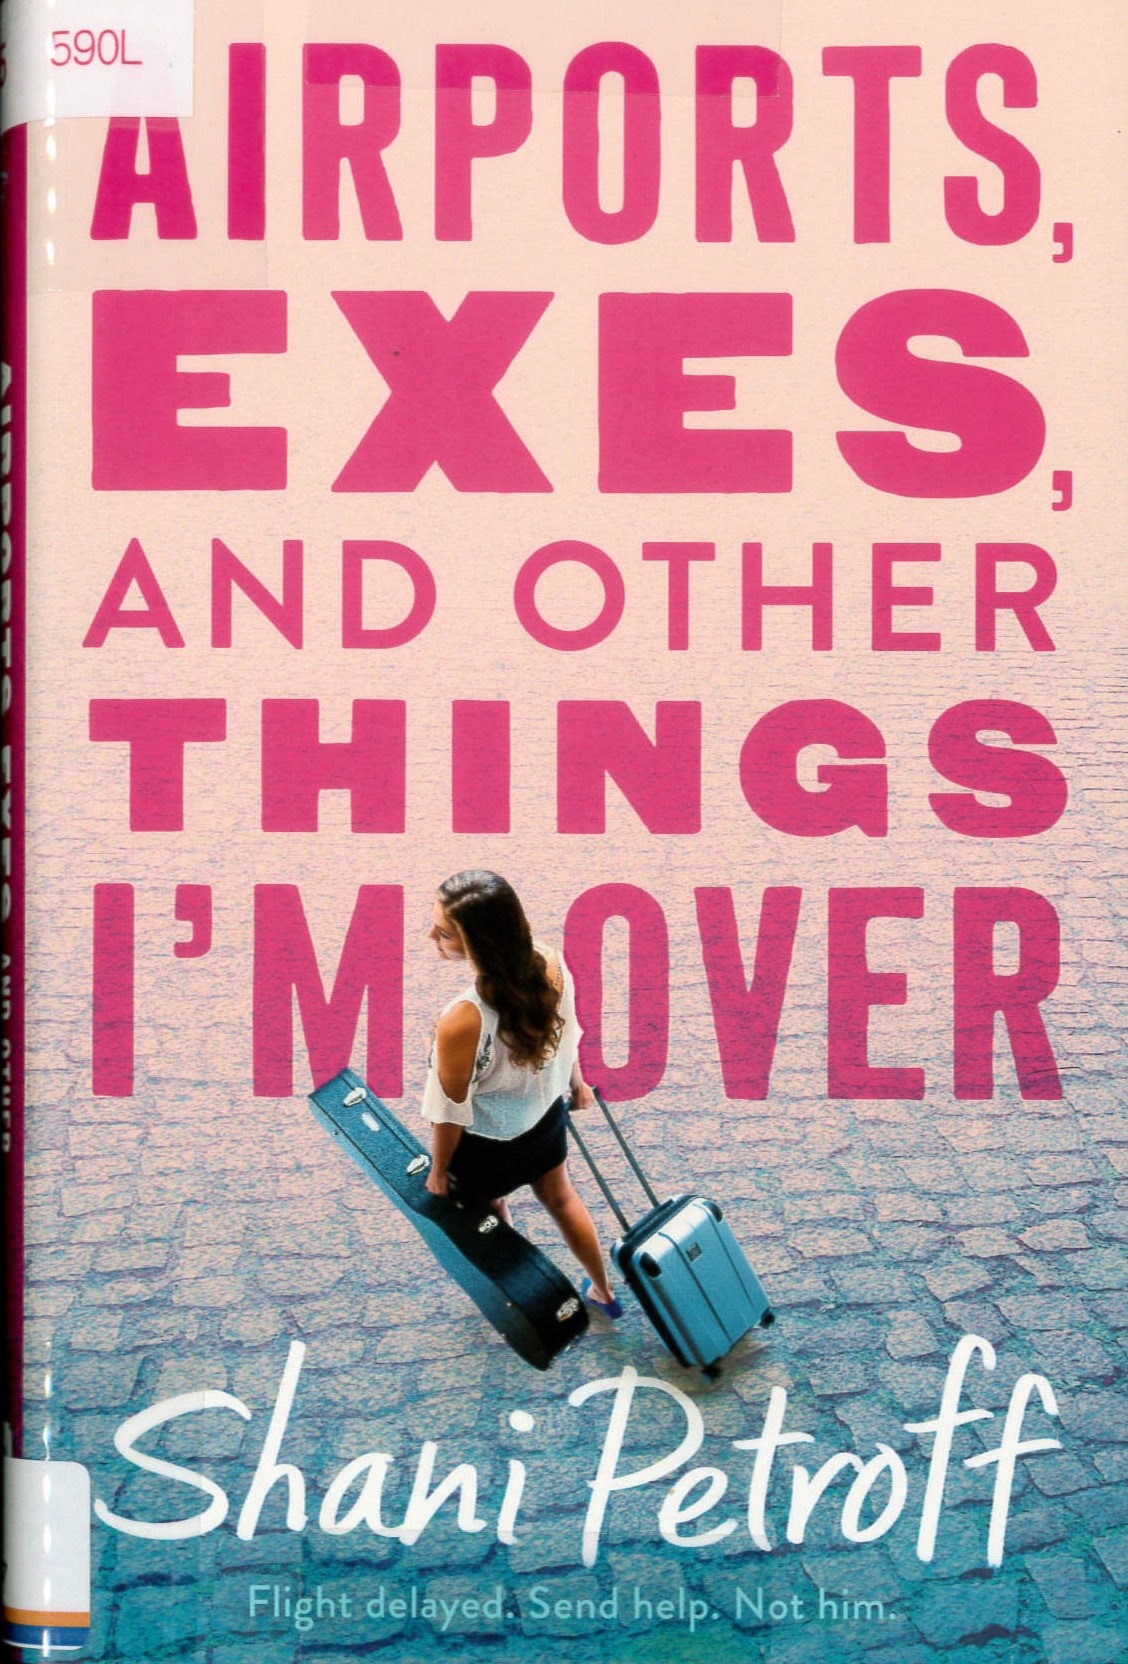 Airports, exes, and other things I